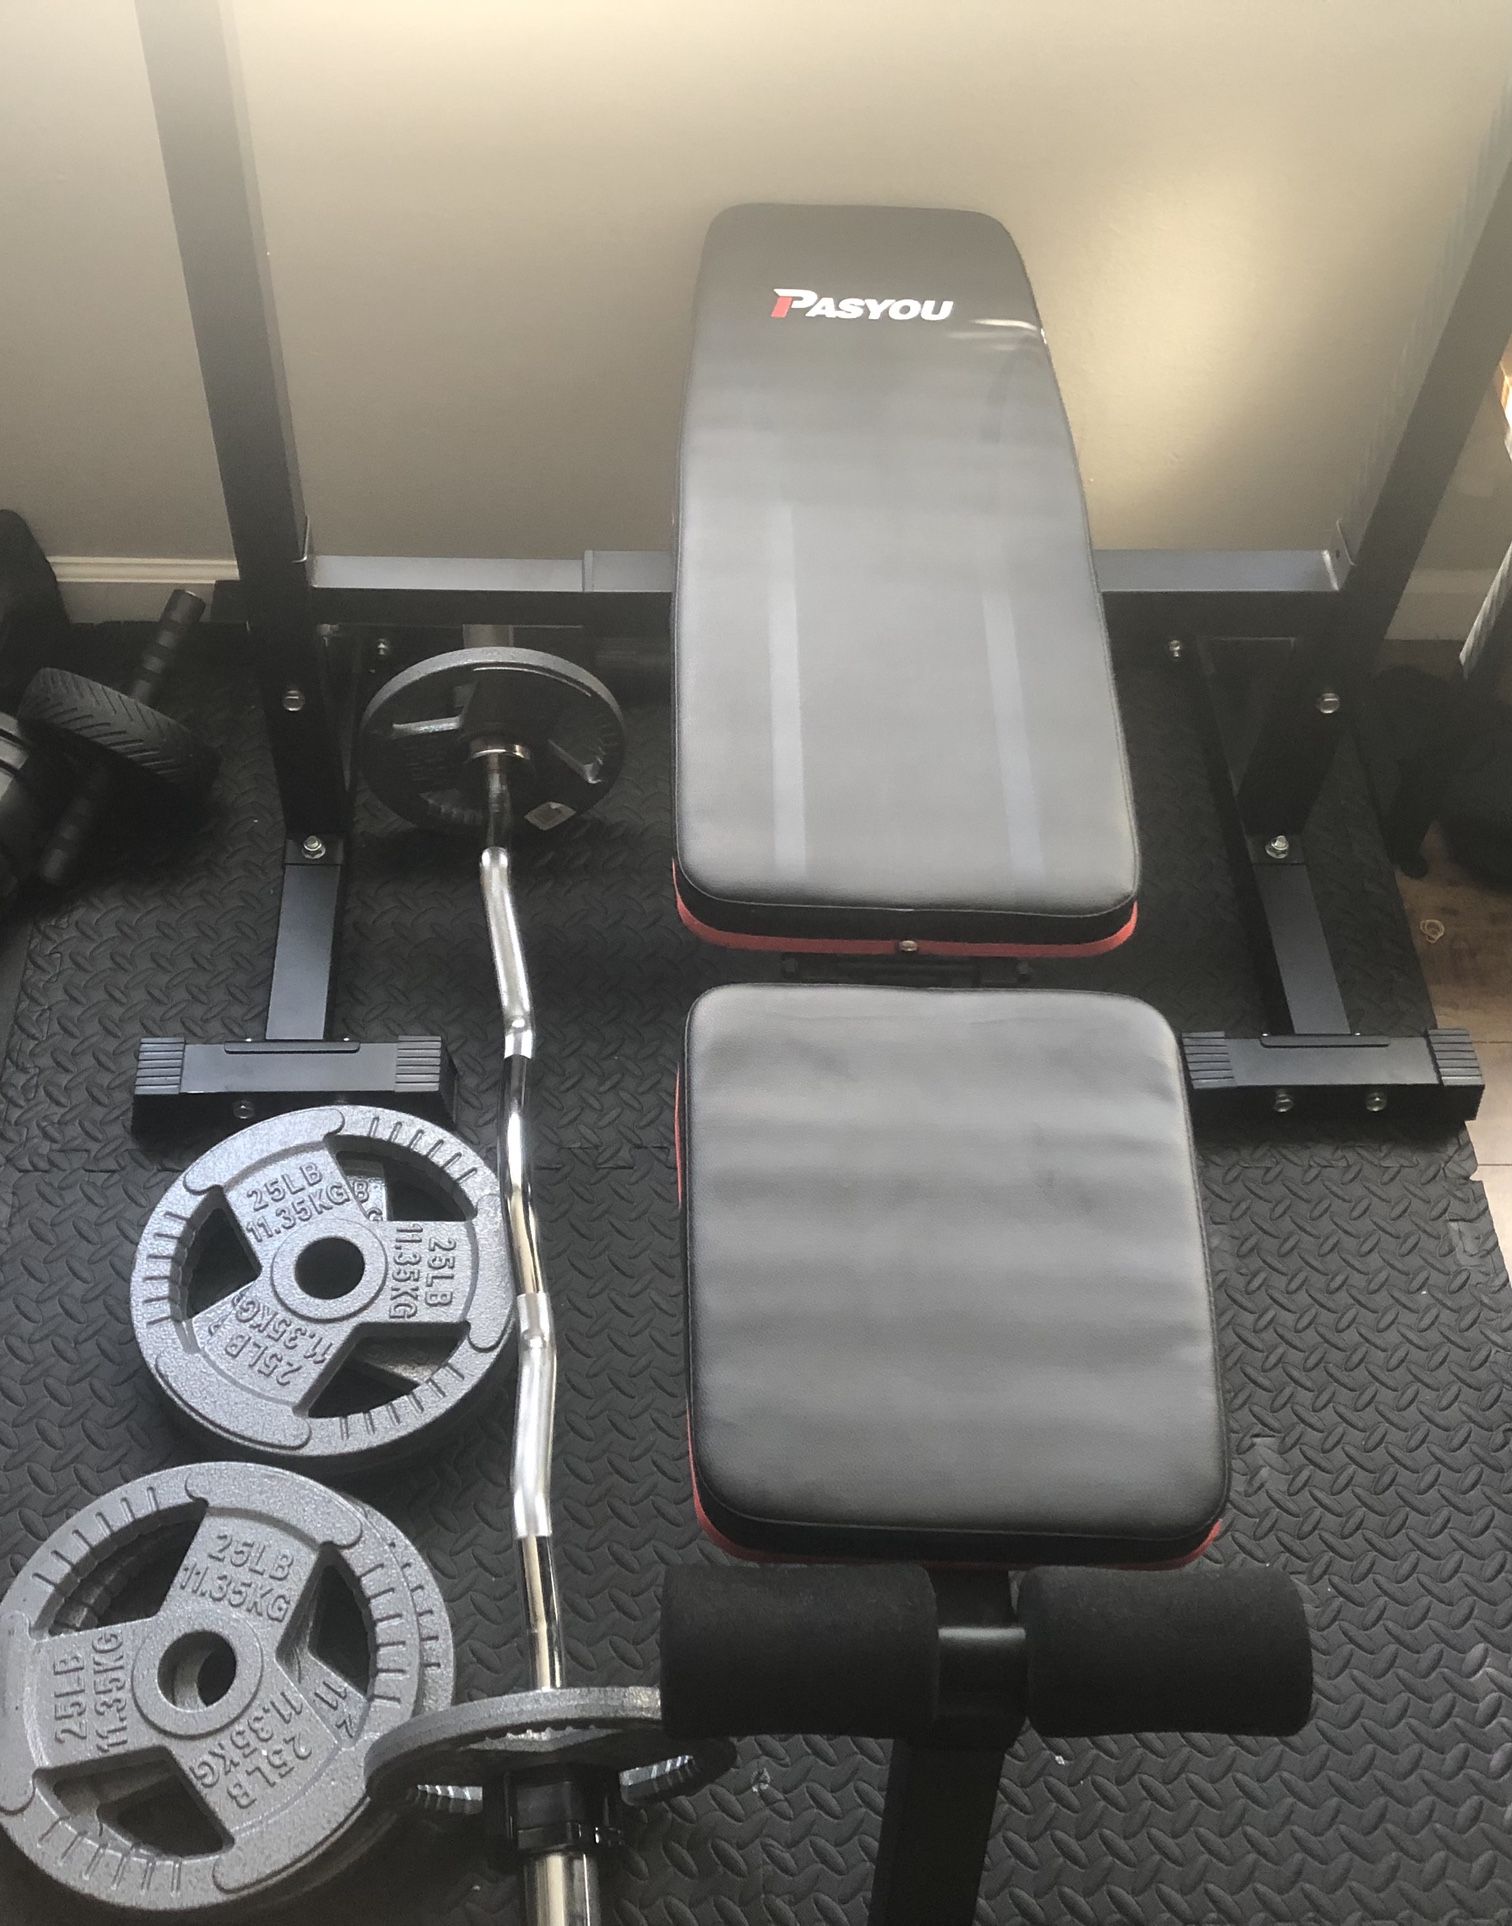 Home Work Equipment (Bench press, Olympic Barbell And Curl Bar W/ Weights)